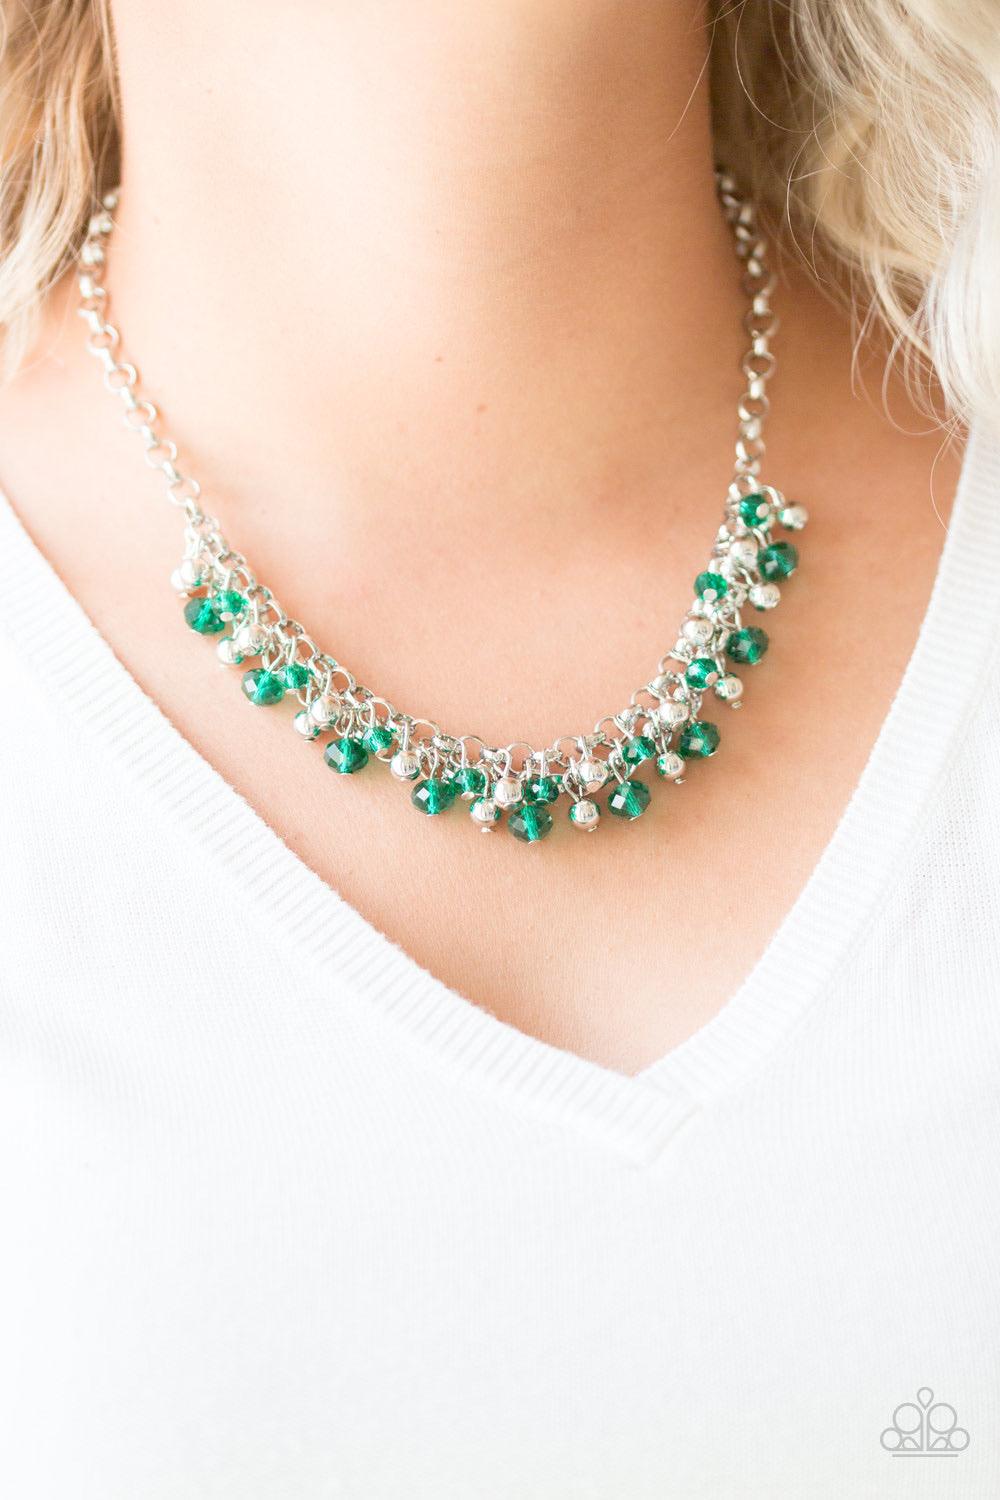 Trust Fund Baby ~Green - Beautifully Blinged